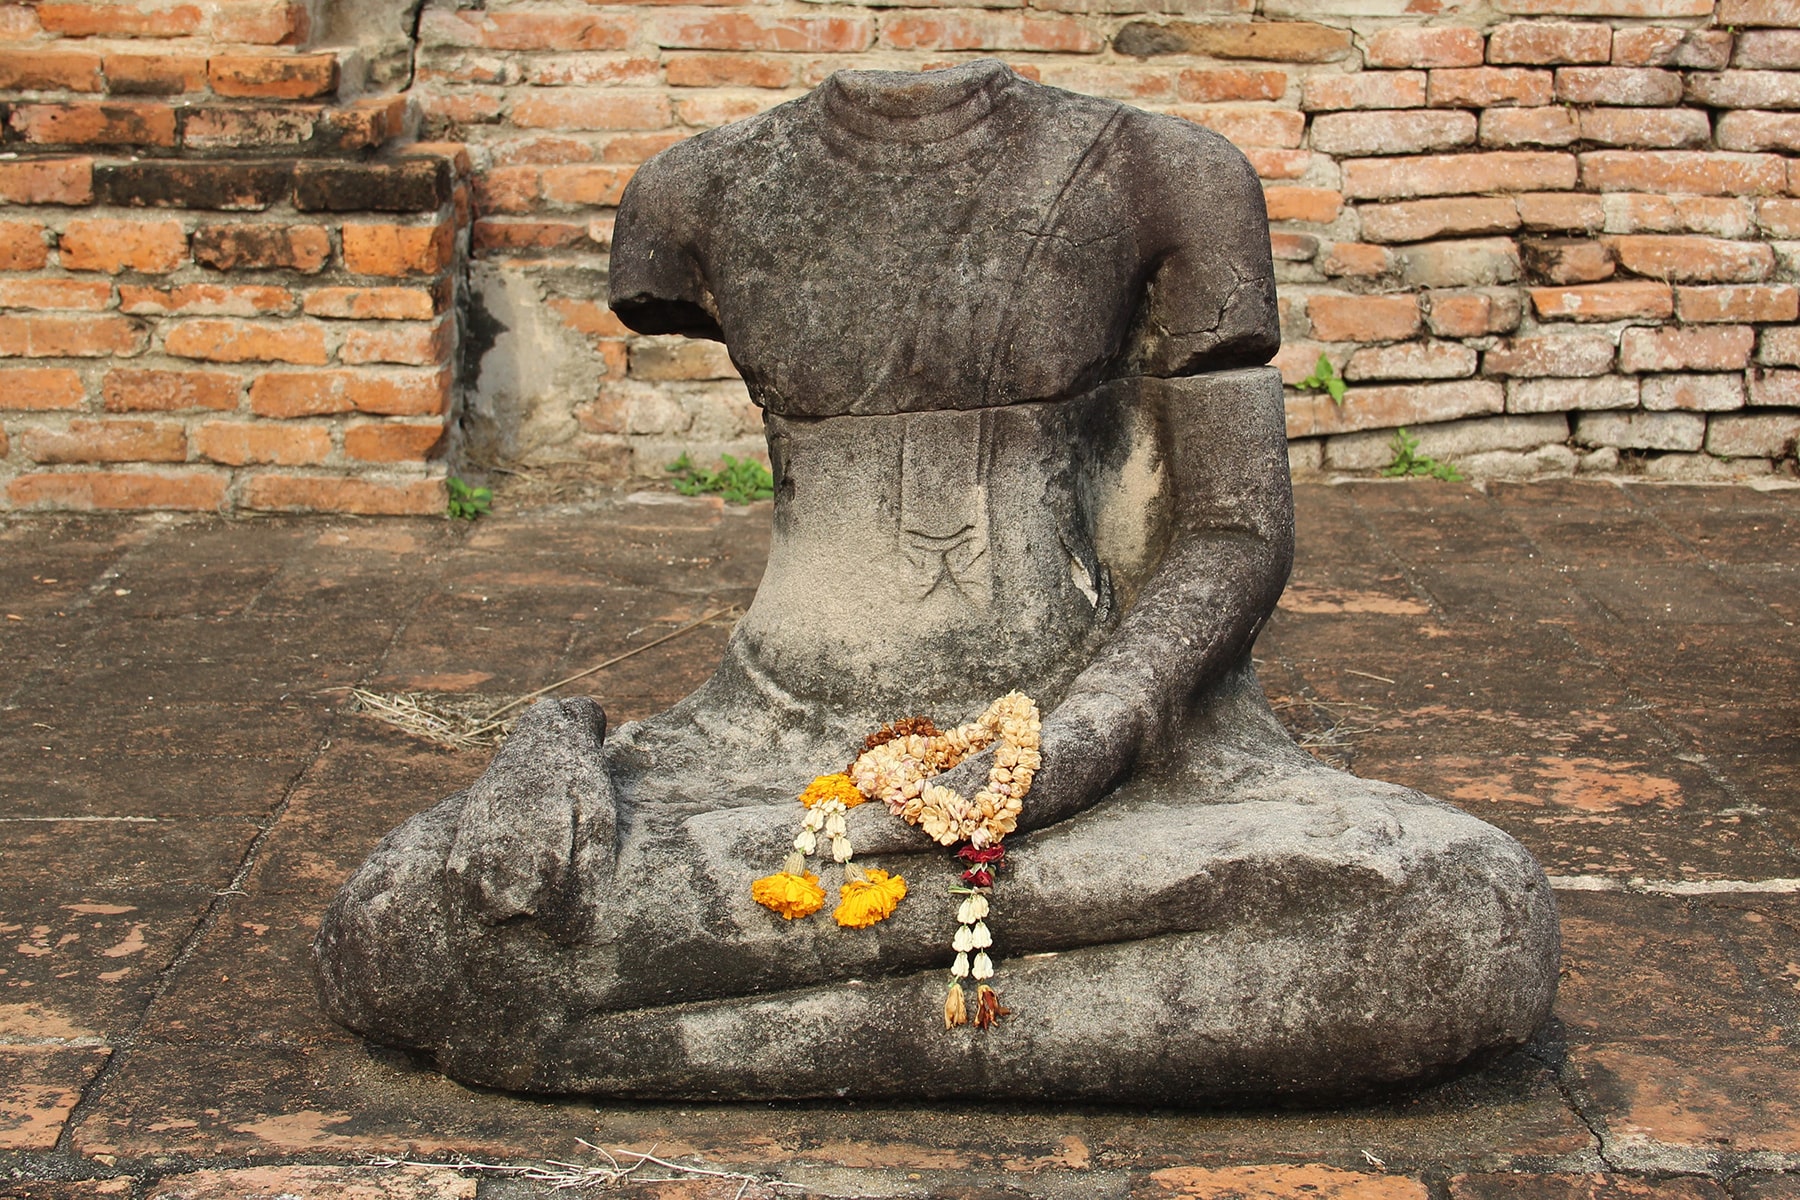 Flower offerings on a statue in the Wat Mahathat in Ayutthaya